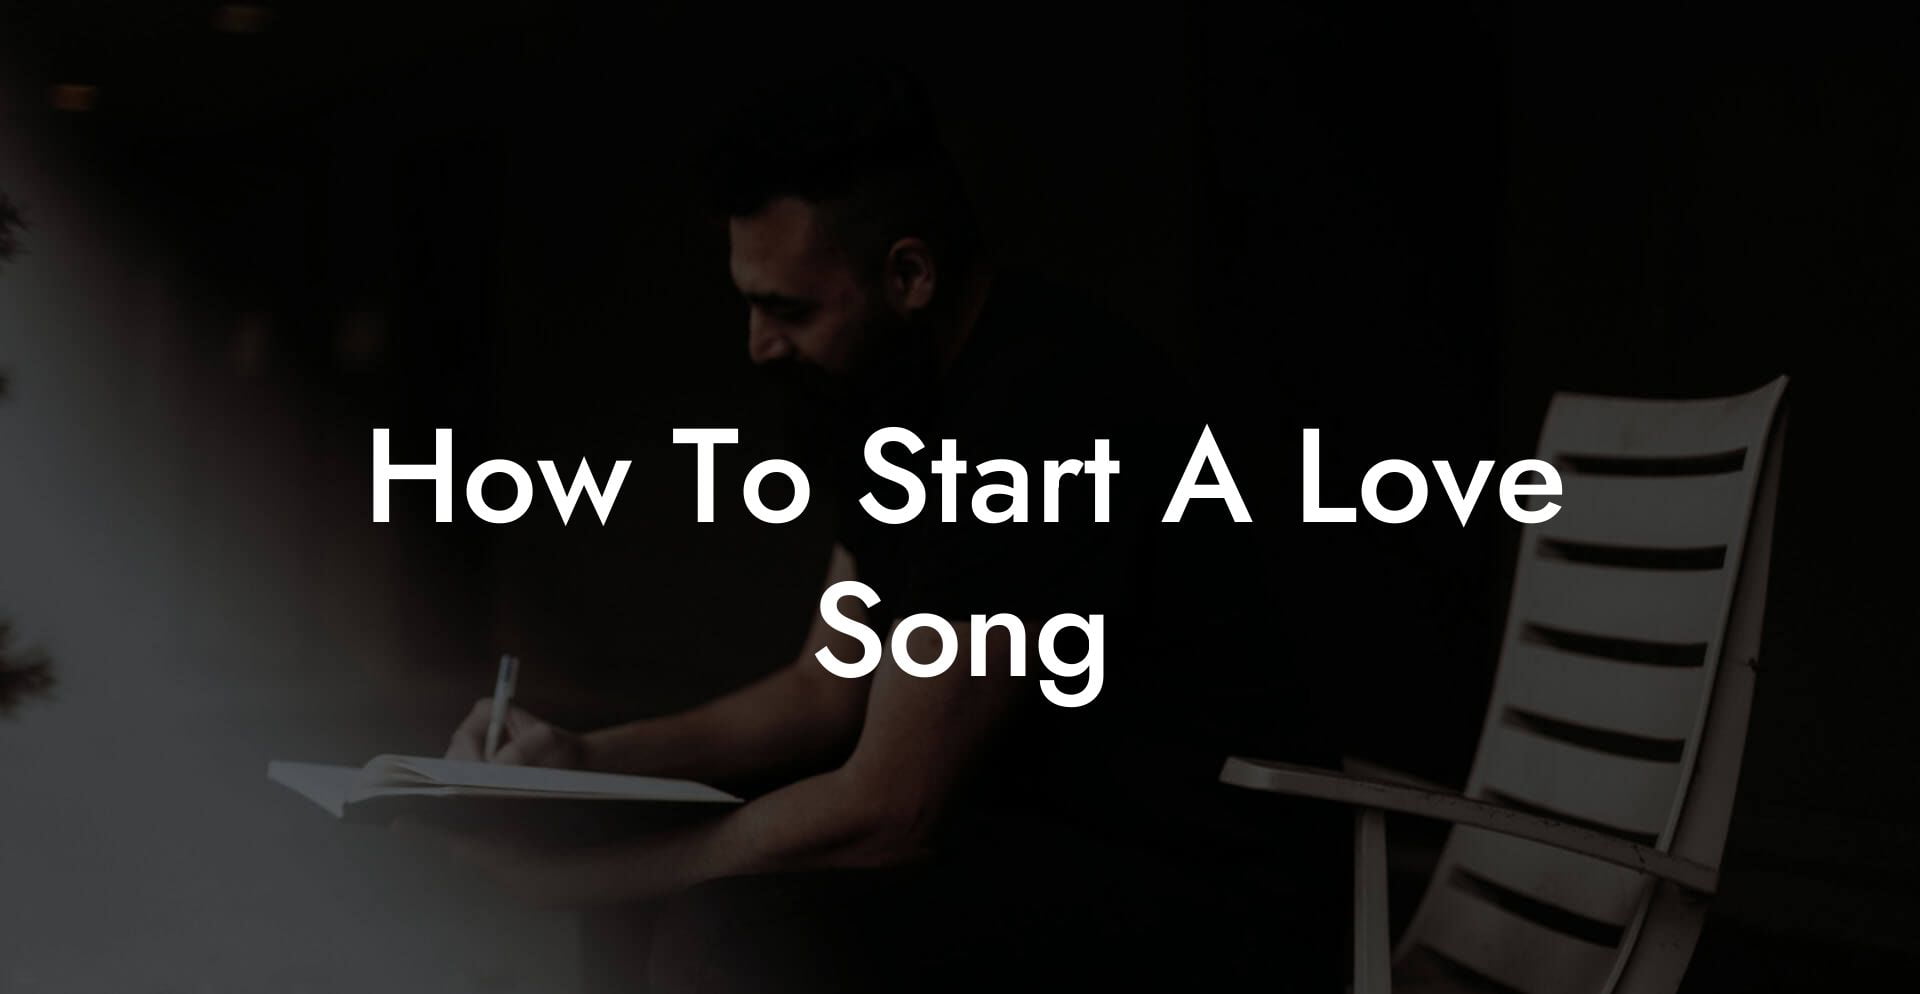 how to start a love song lyric assistant